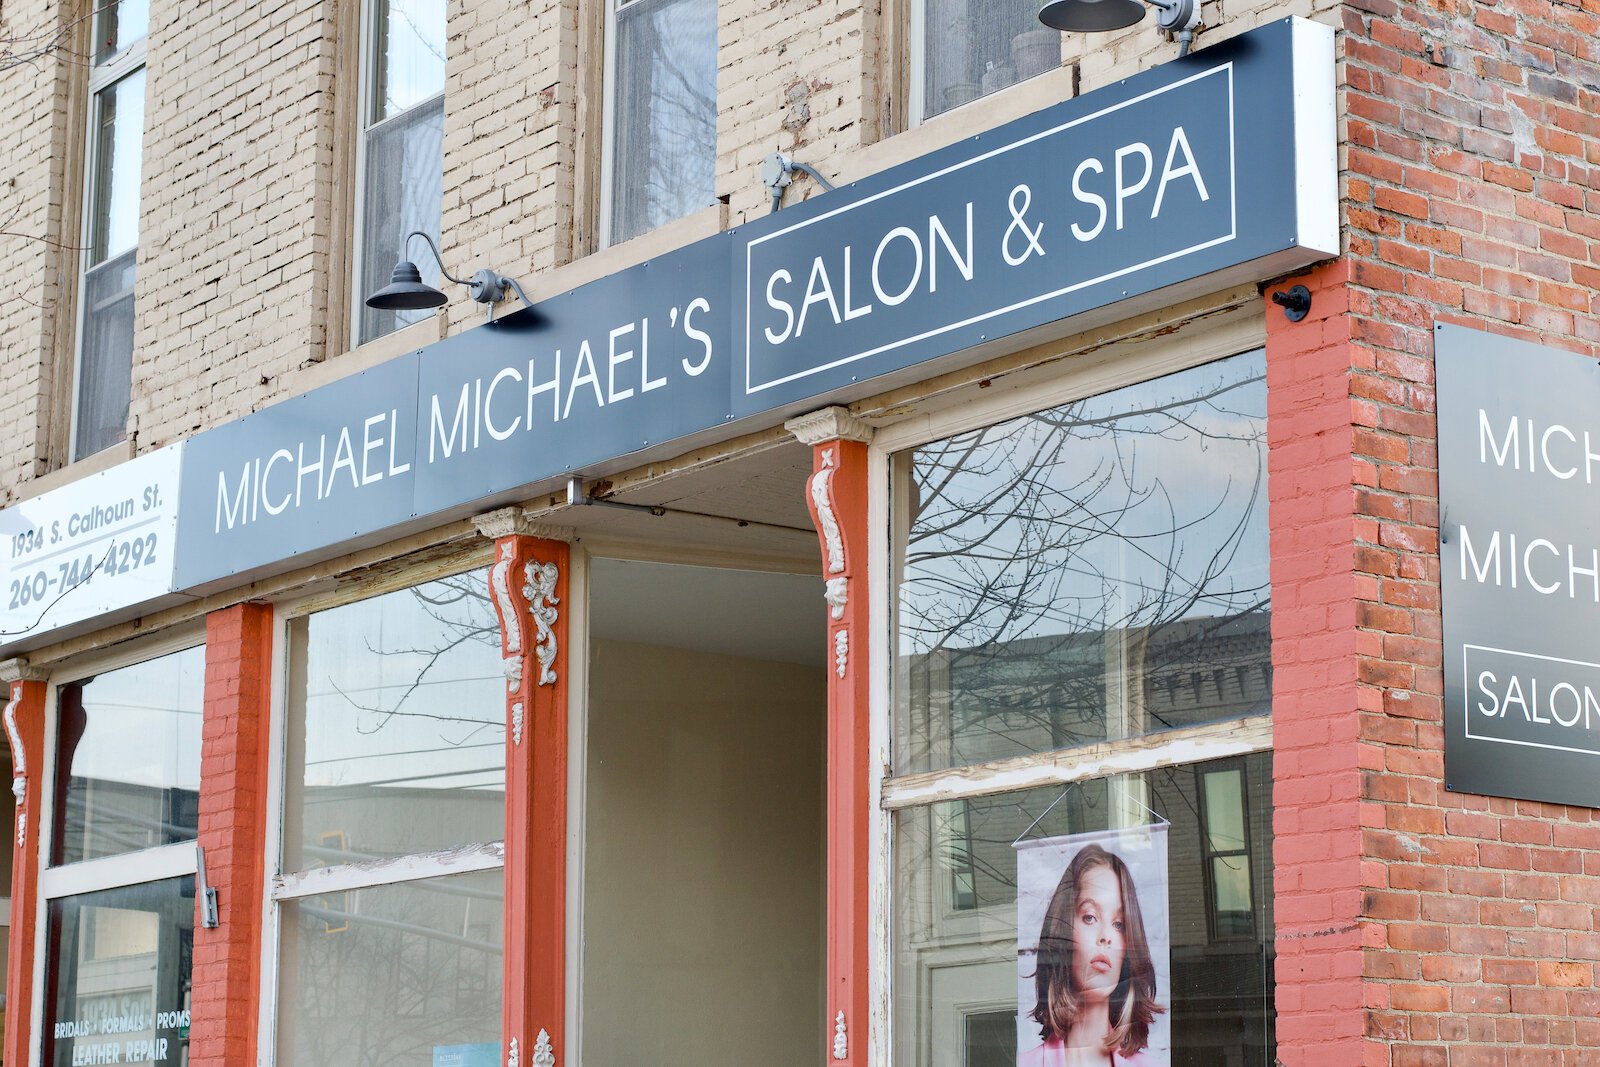 The exterior of Michael Michael's Salon and Spa at 1932 South Calhoun Street.